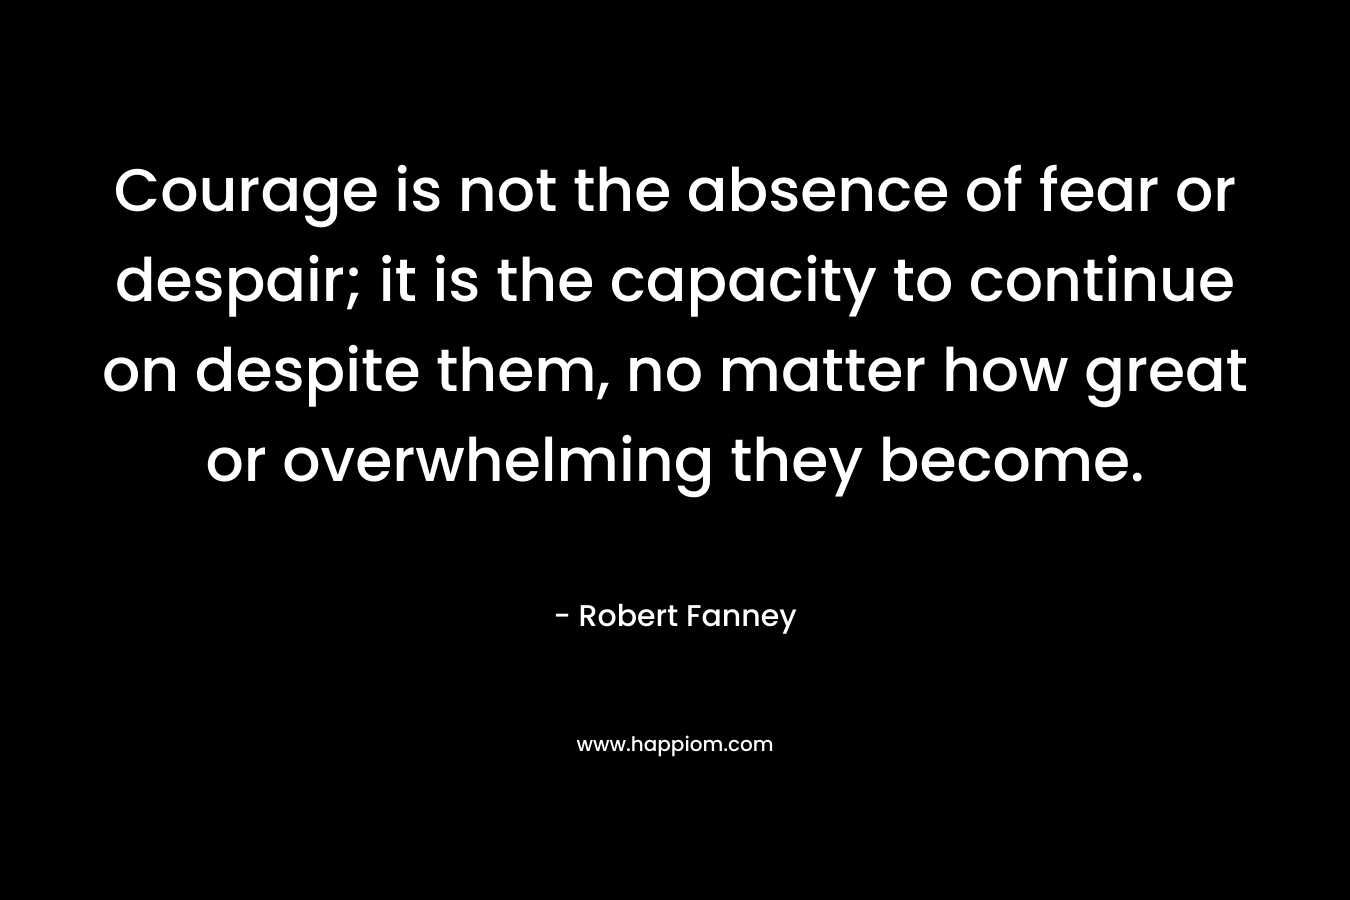 Courage is not the absence of fear or despair; it is the capacity to continue on despite them, no matter how great or overwhelming they become.